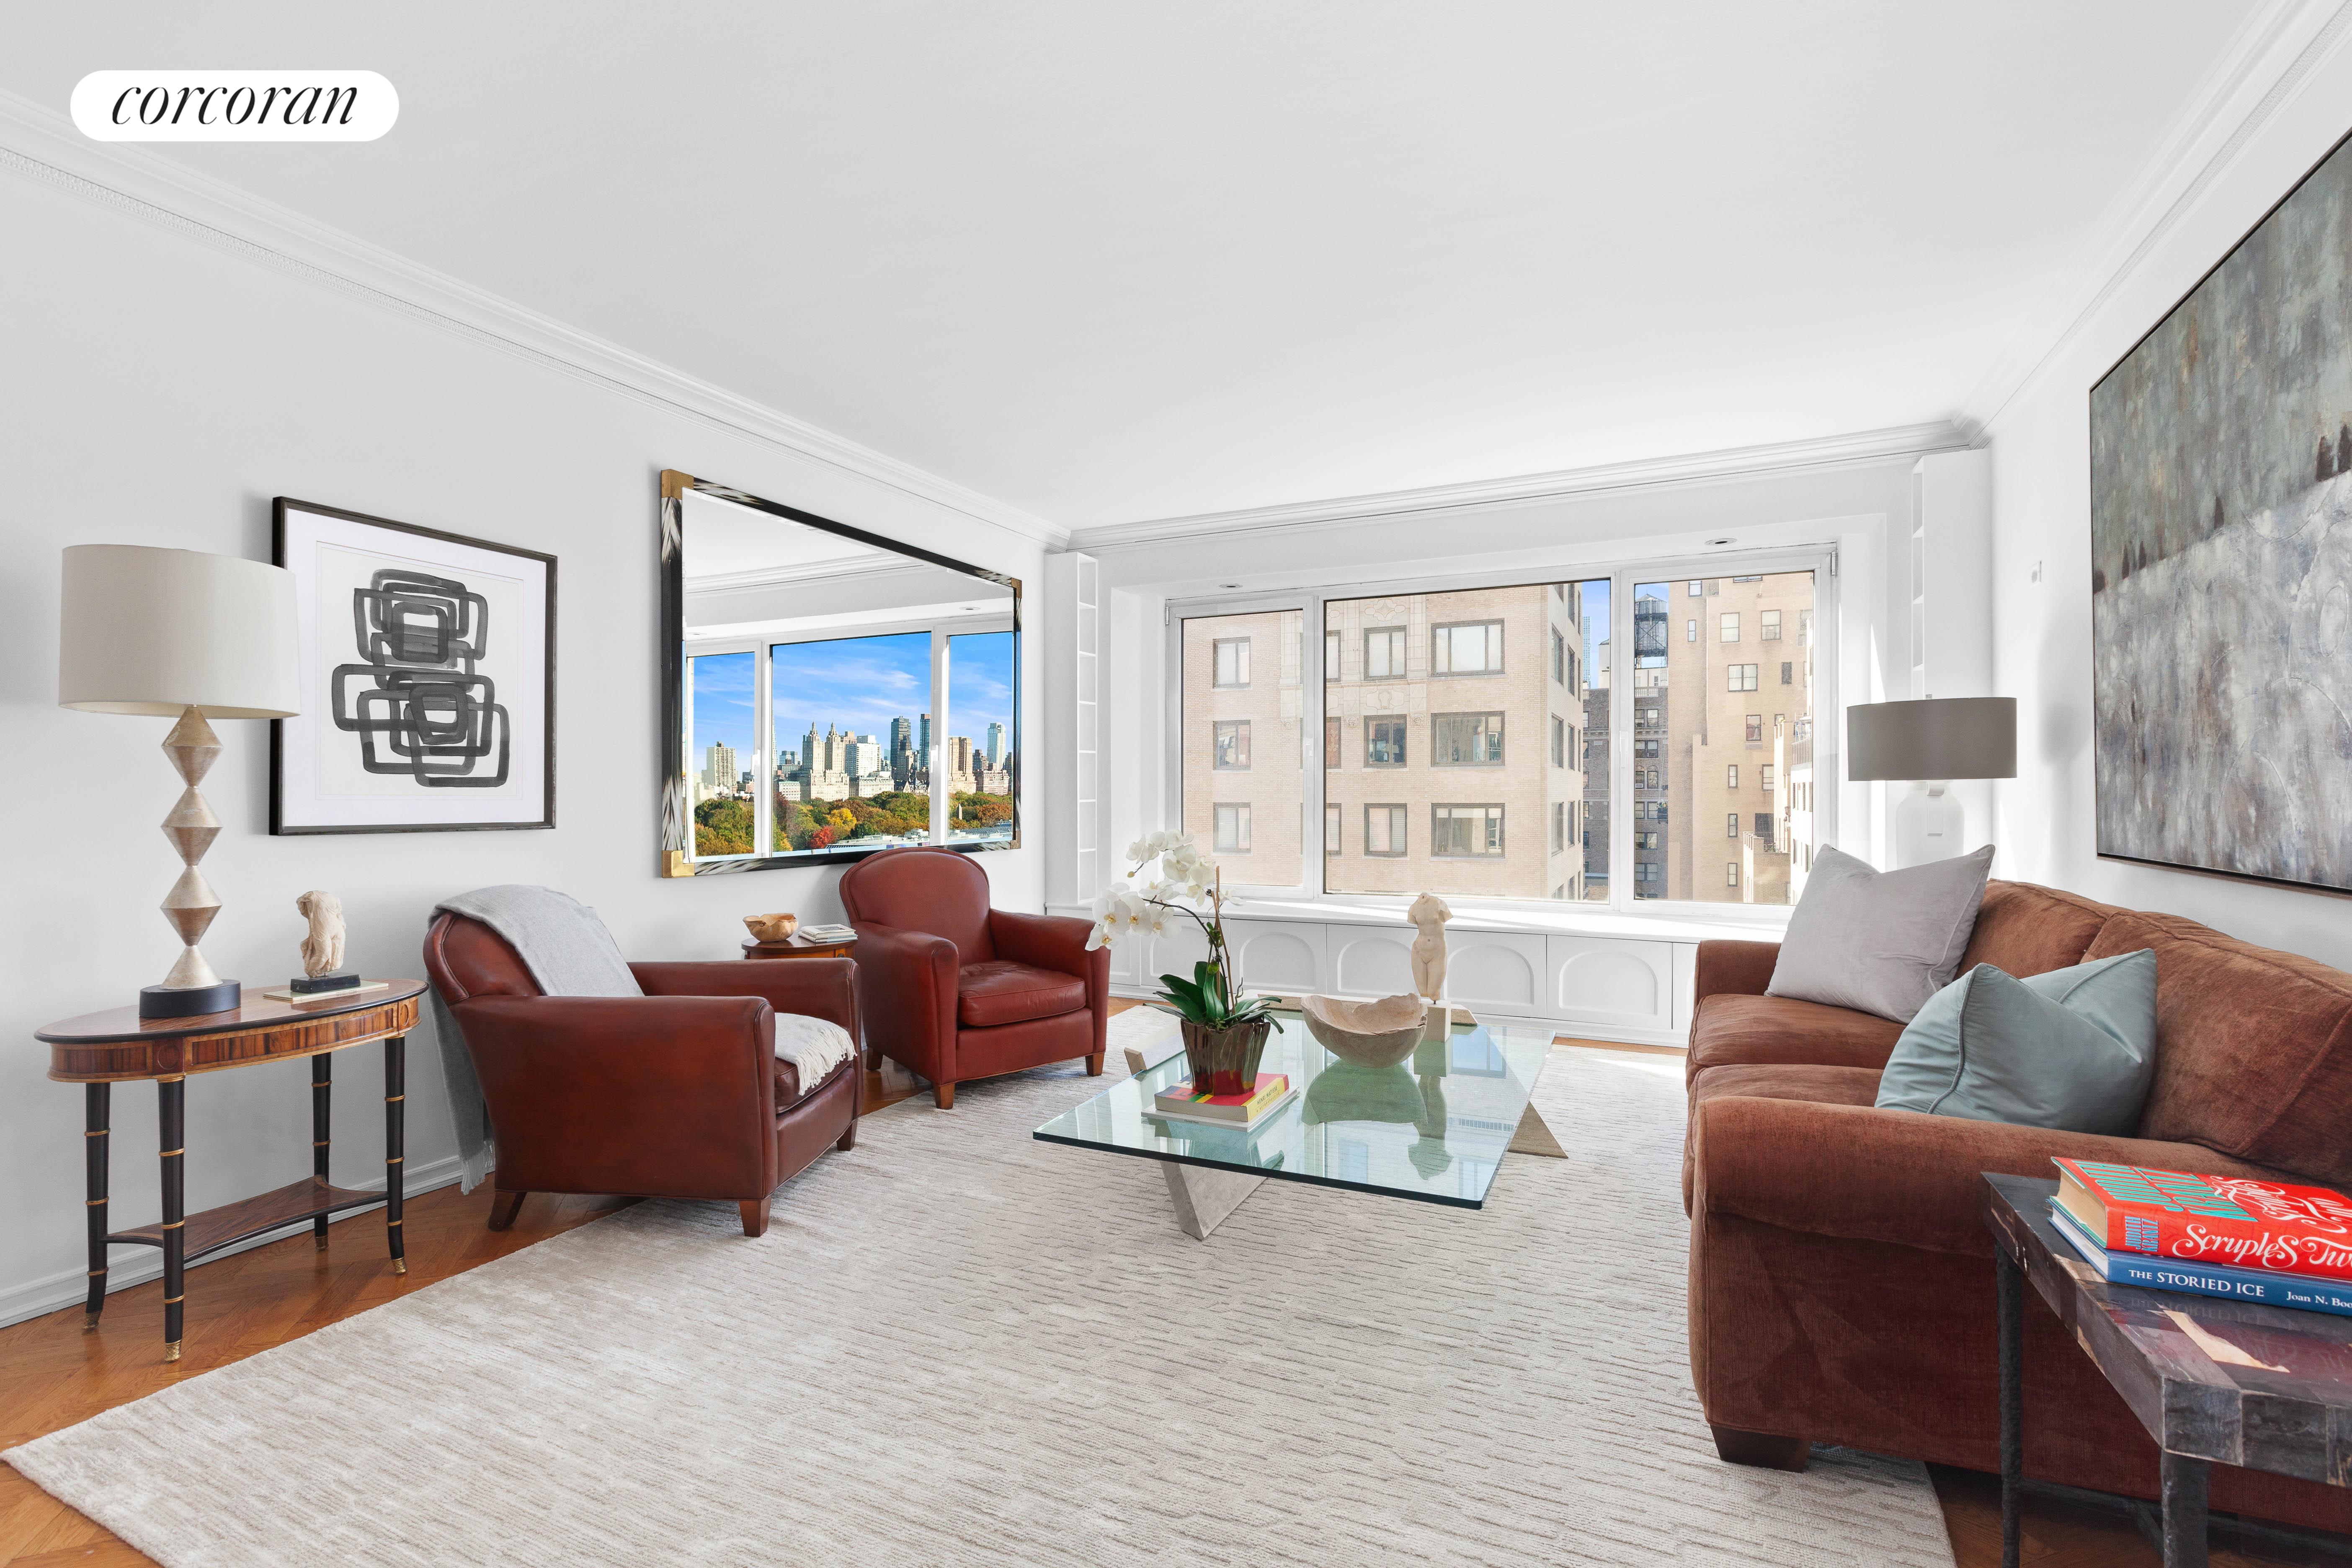 1050 5th Avenue 15C, Carnegie Hill, Upper East Side, NYC - 2 Bedrooms  
2 Bathrooms  
5 Rooms - 